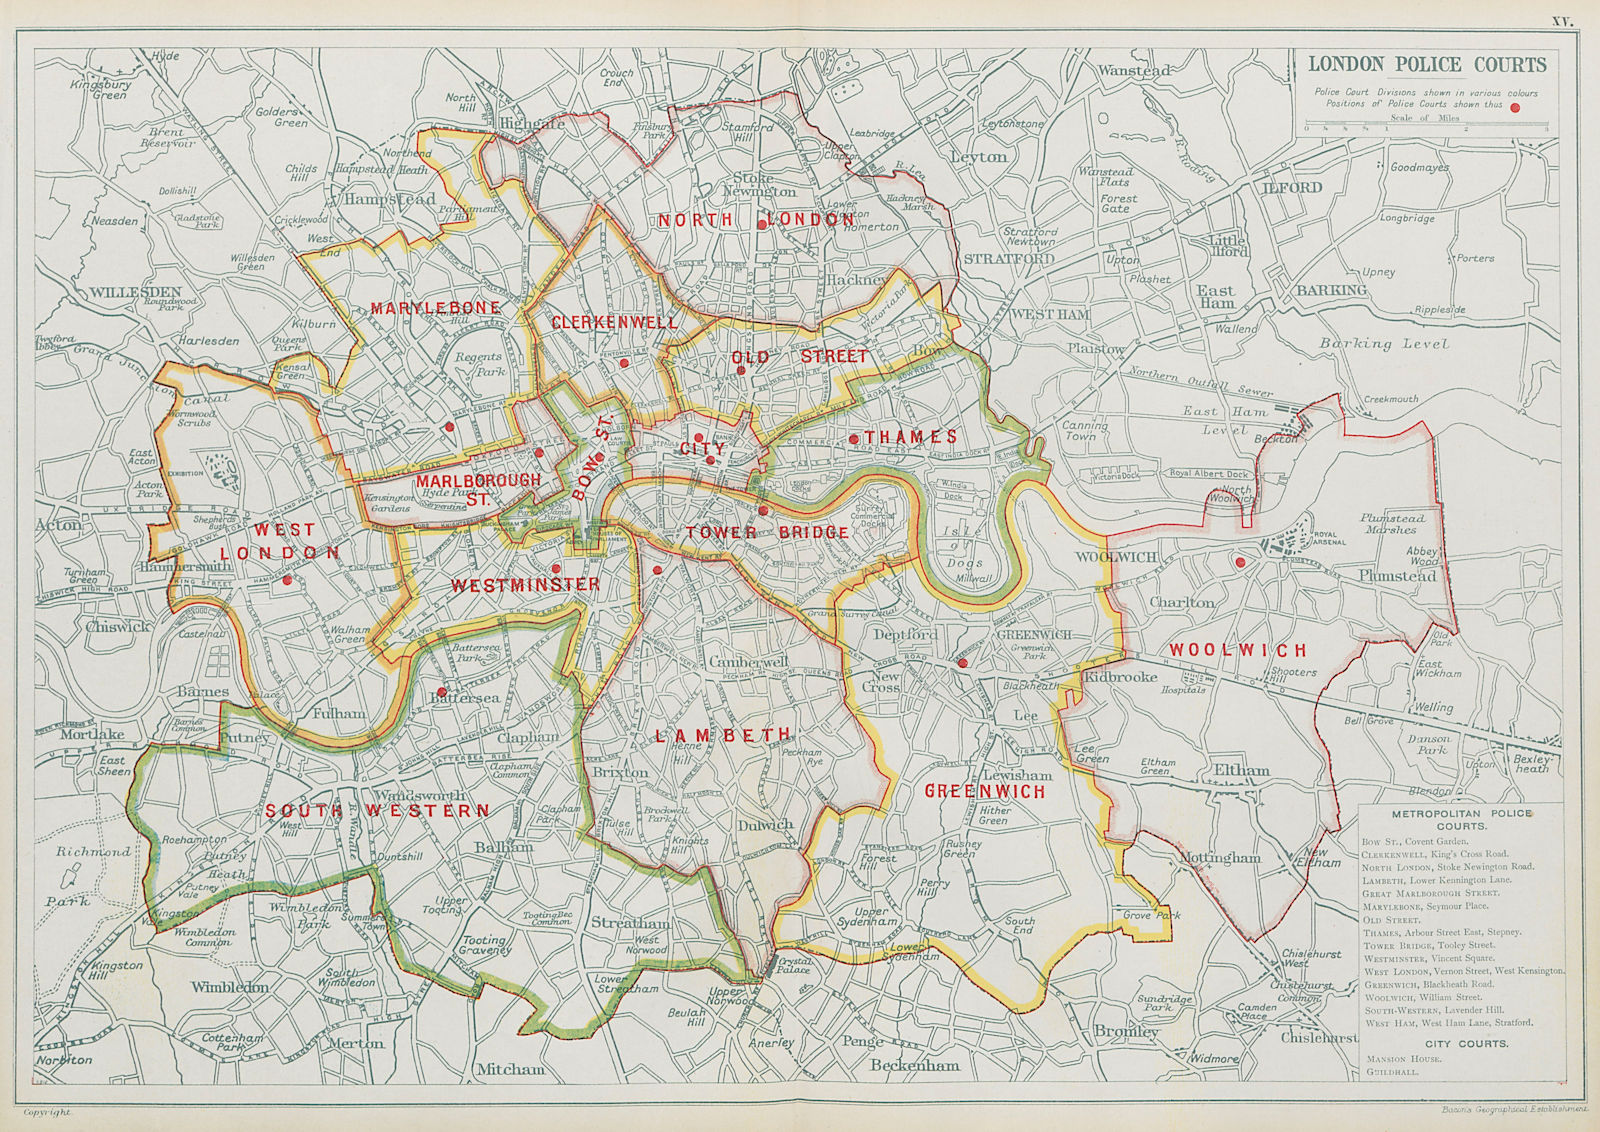 Associate Product LONDON POLICE COURTS. Showing divisions & court locations. BACON 1913 old map